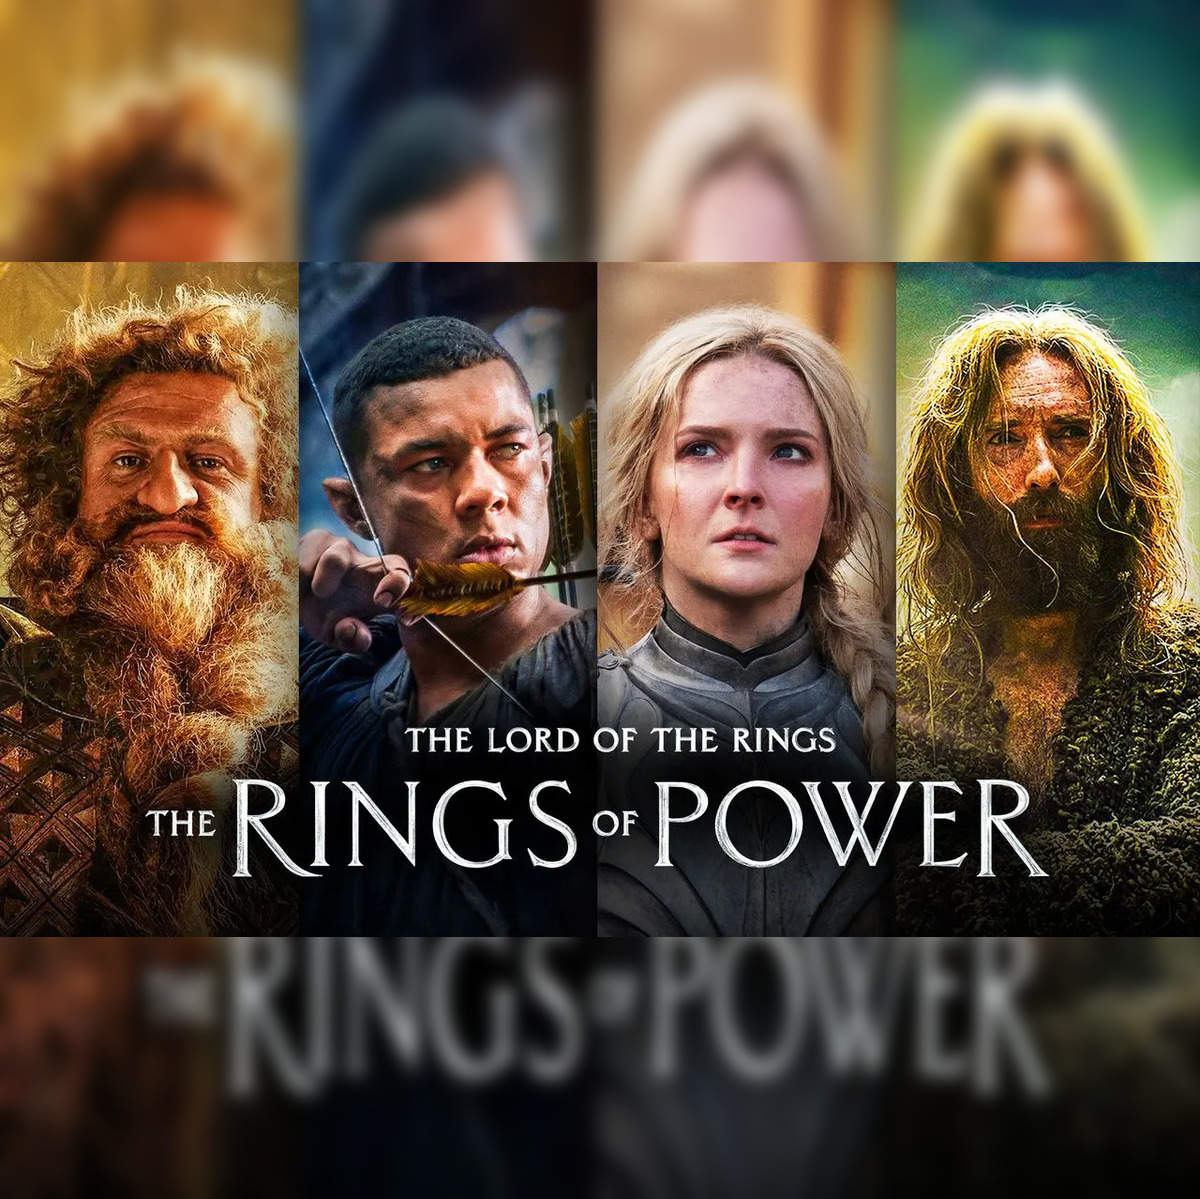 The Rings of Power' season 1: All the details you may have missed